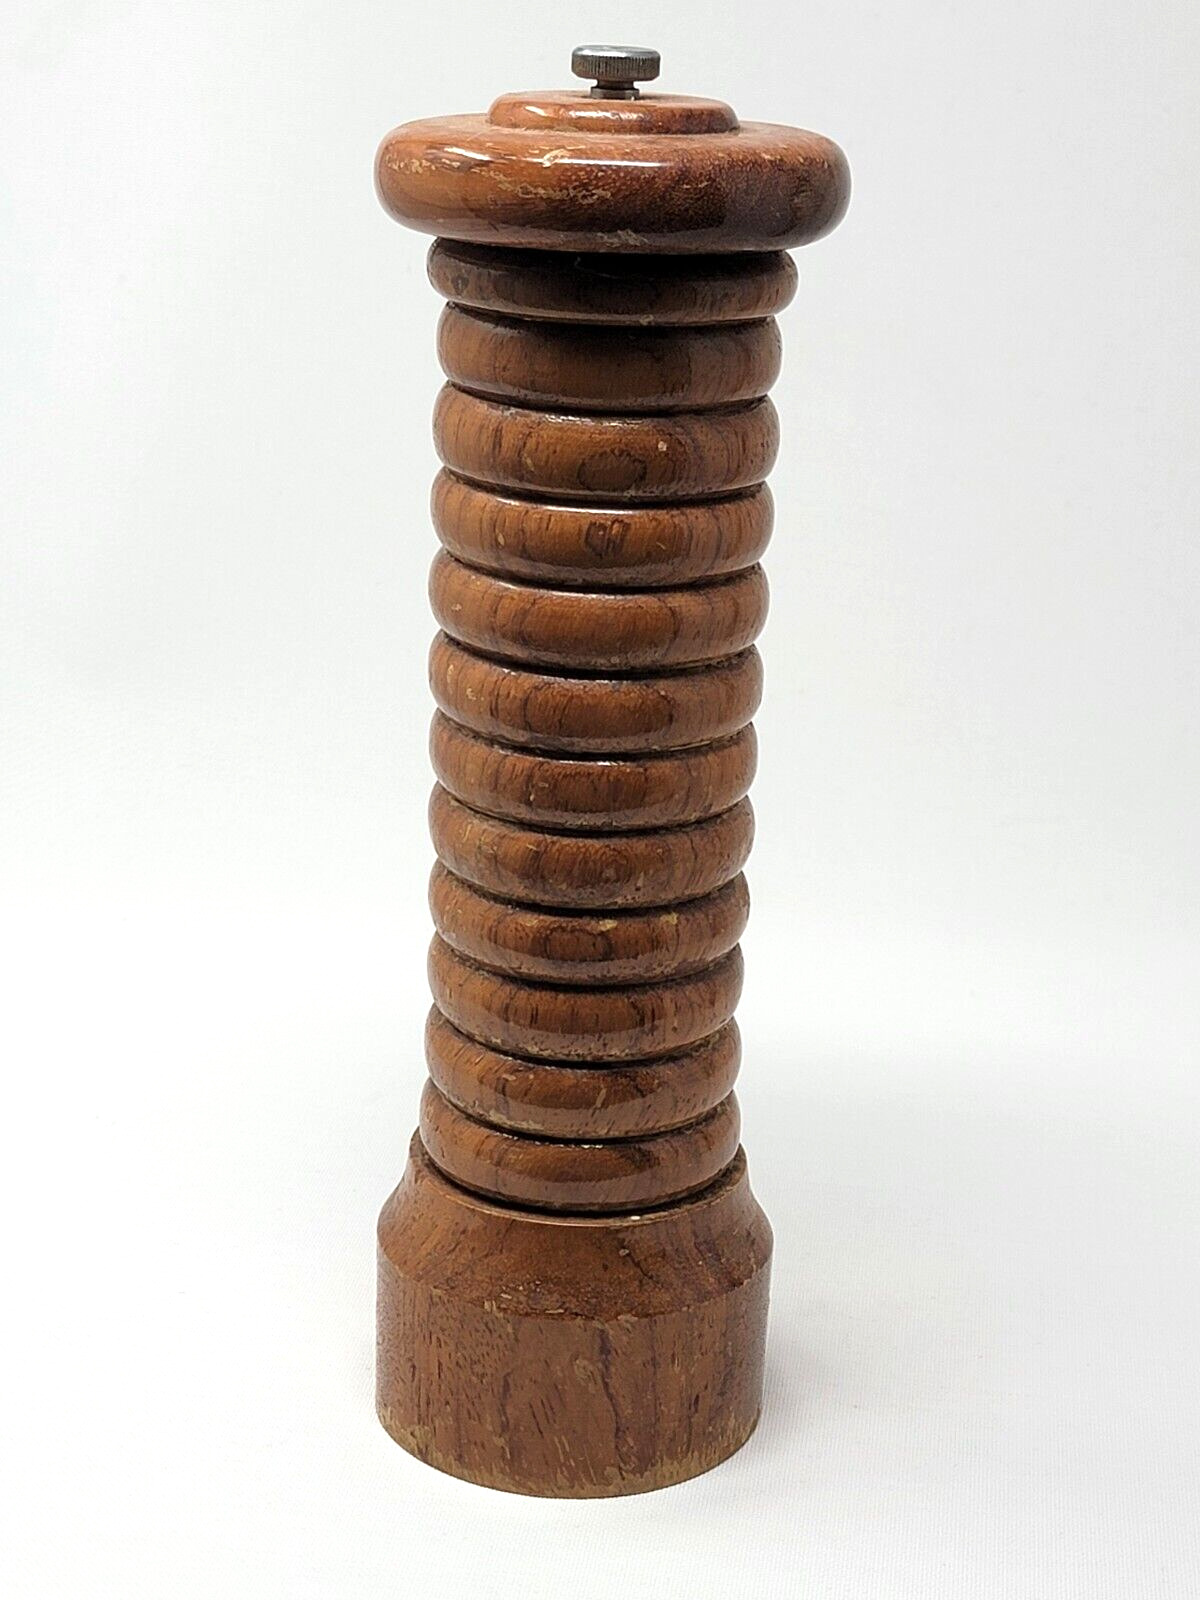 LARGE Marlux France Vintage 12 Inch Tall Wood Restaurant Pepper Mill READ